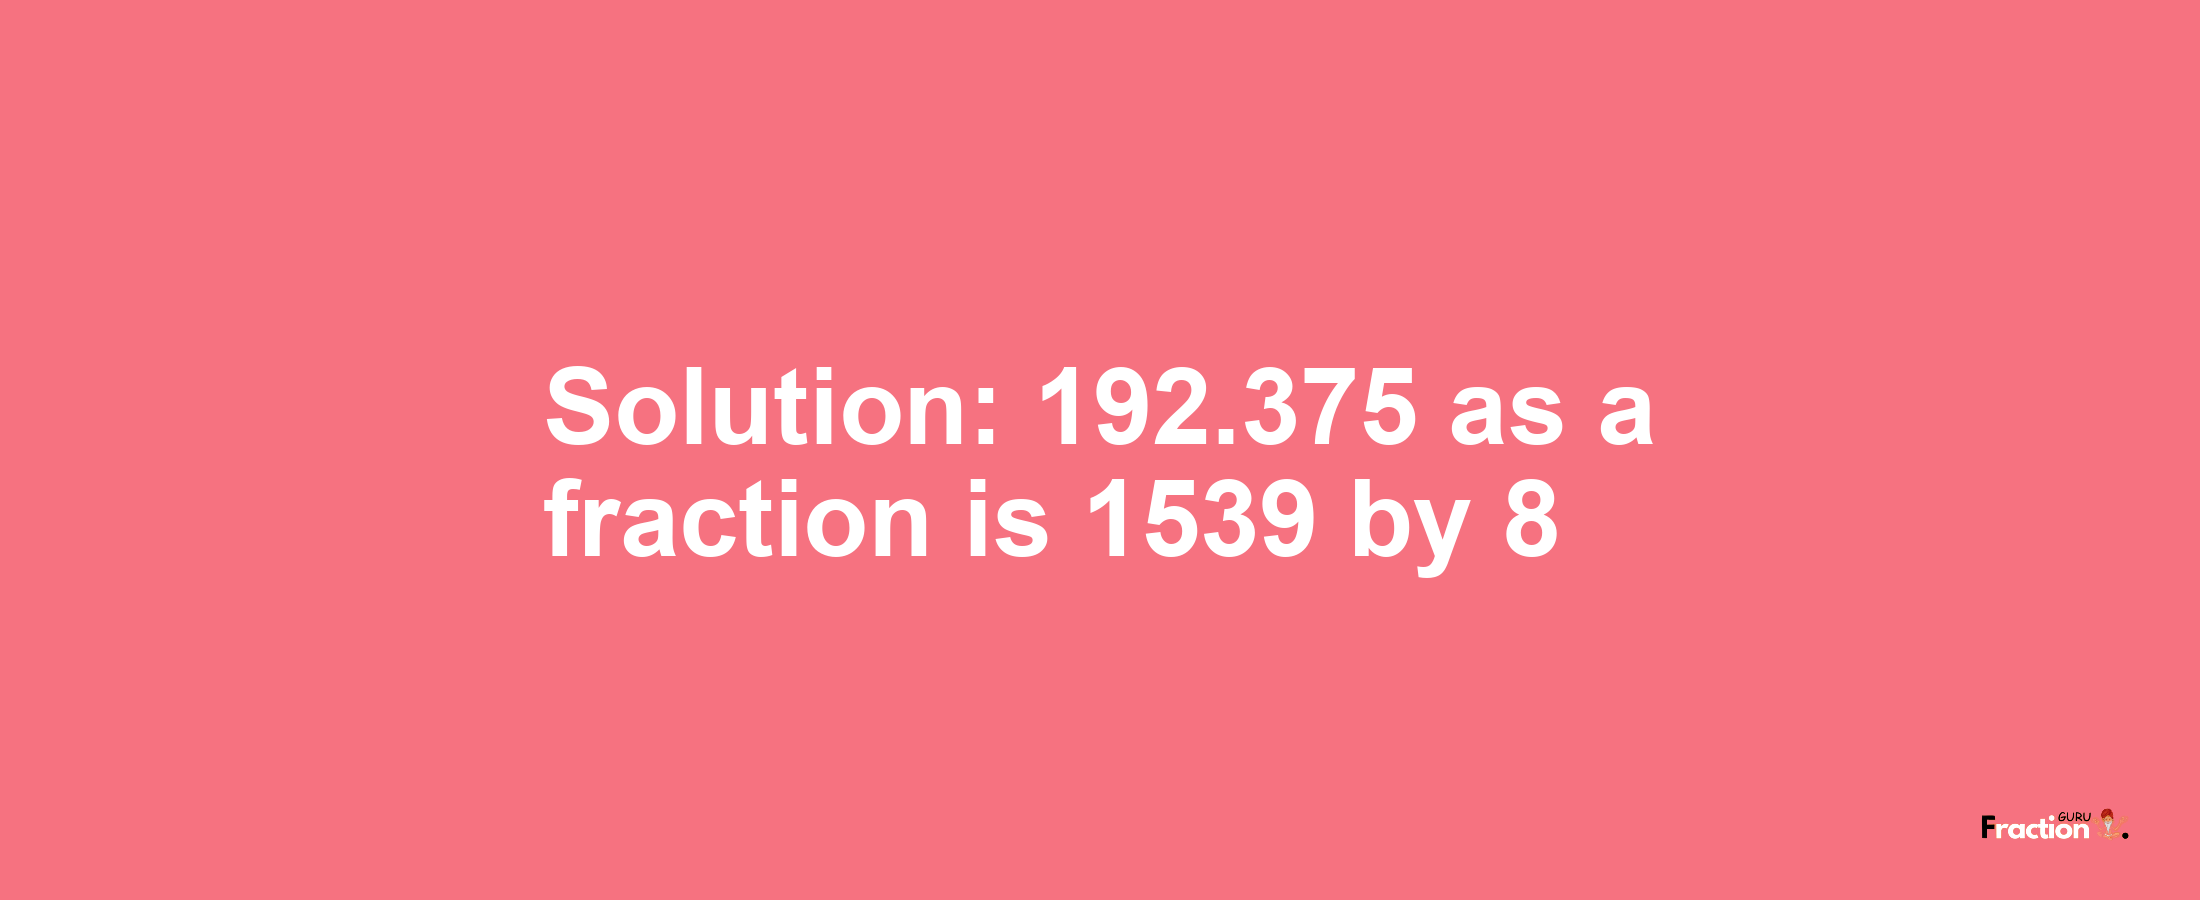 Solution:192.375 as a fraction is 1539/8